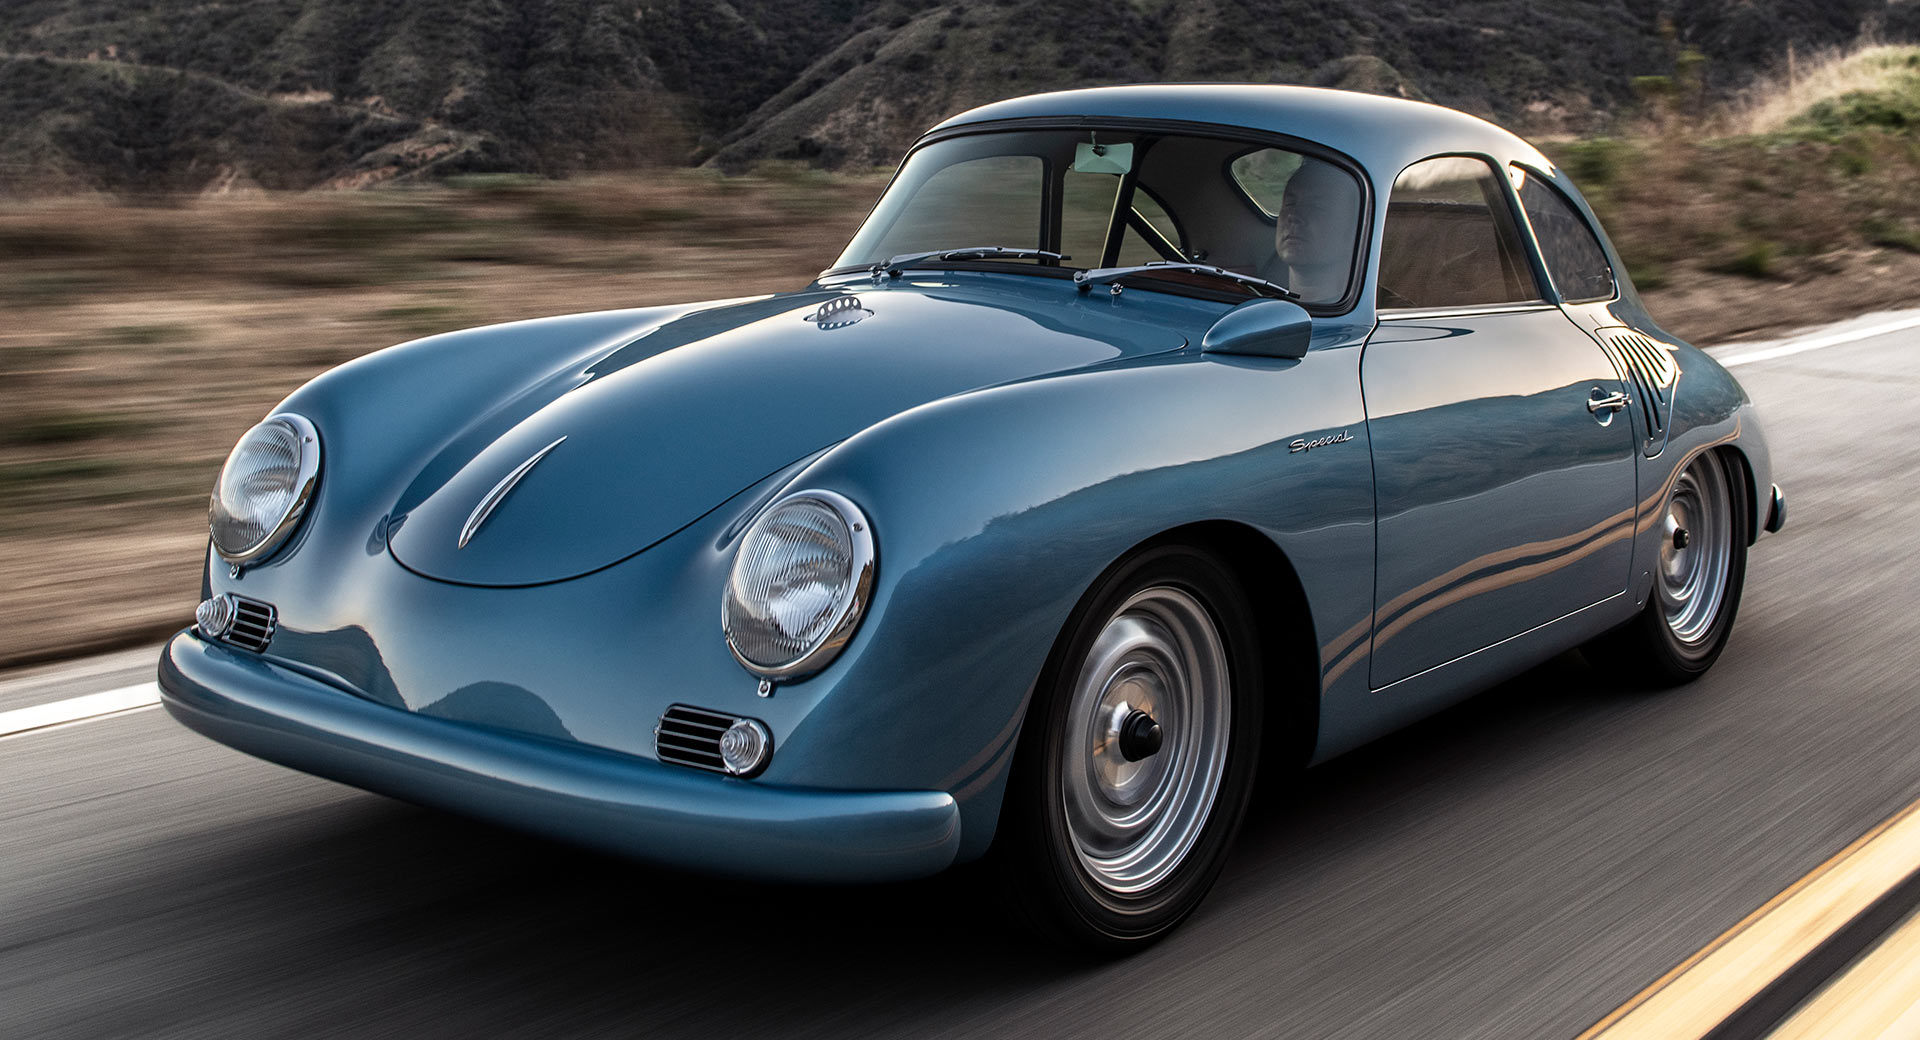 Emory Motorsports' Latest Porsche 356 A Coupe Restomod Is The Stuff Of ...